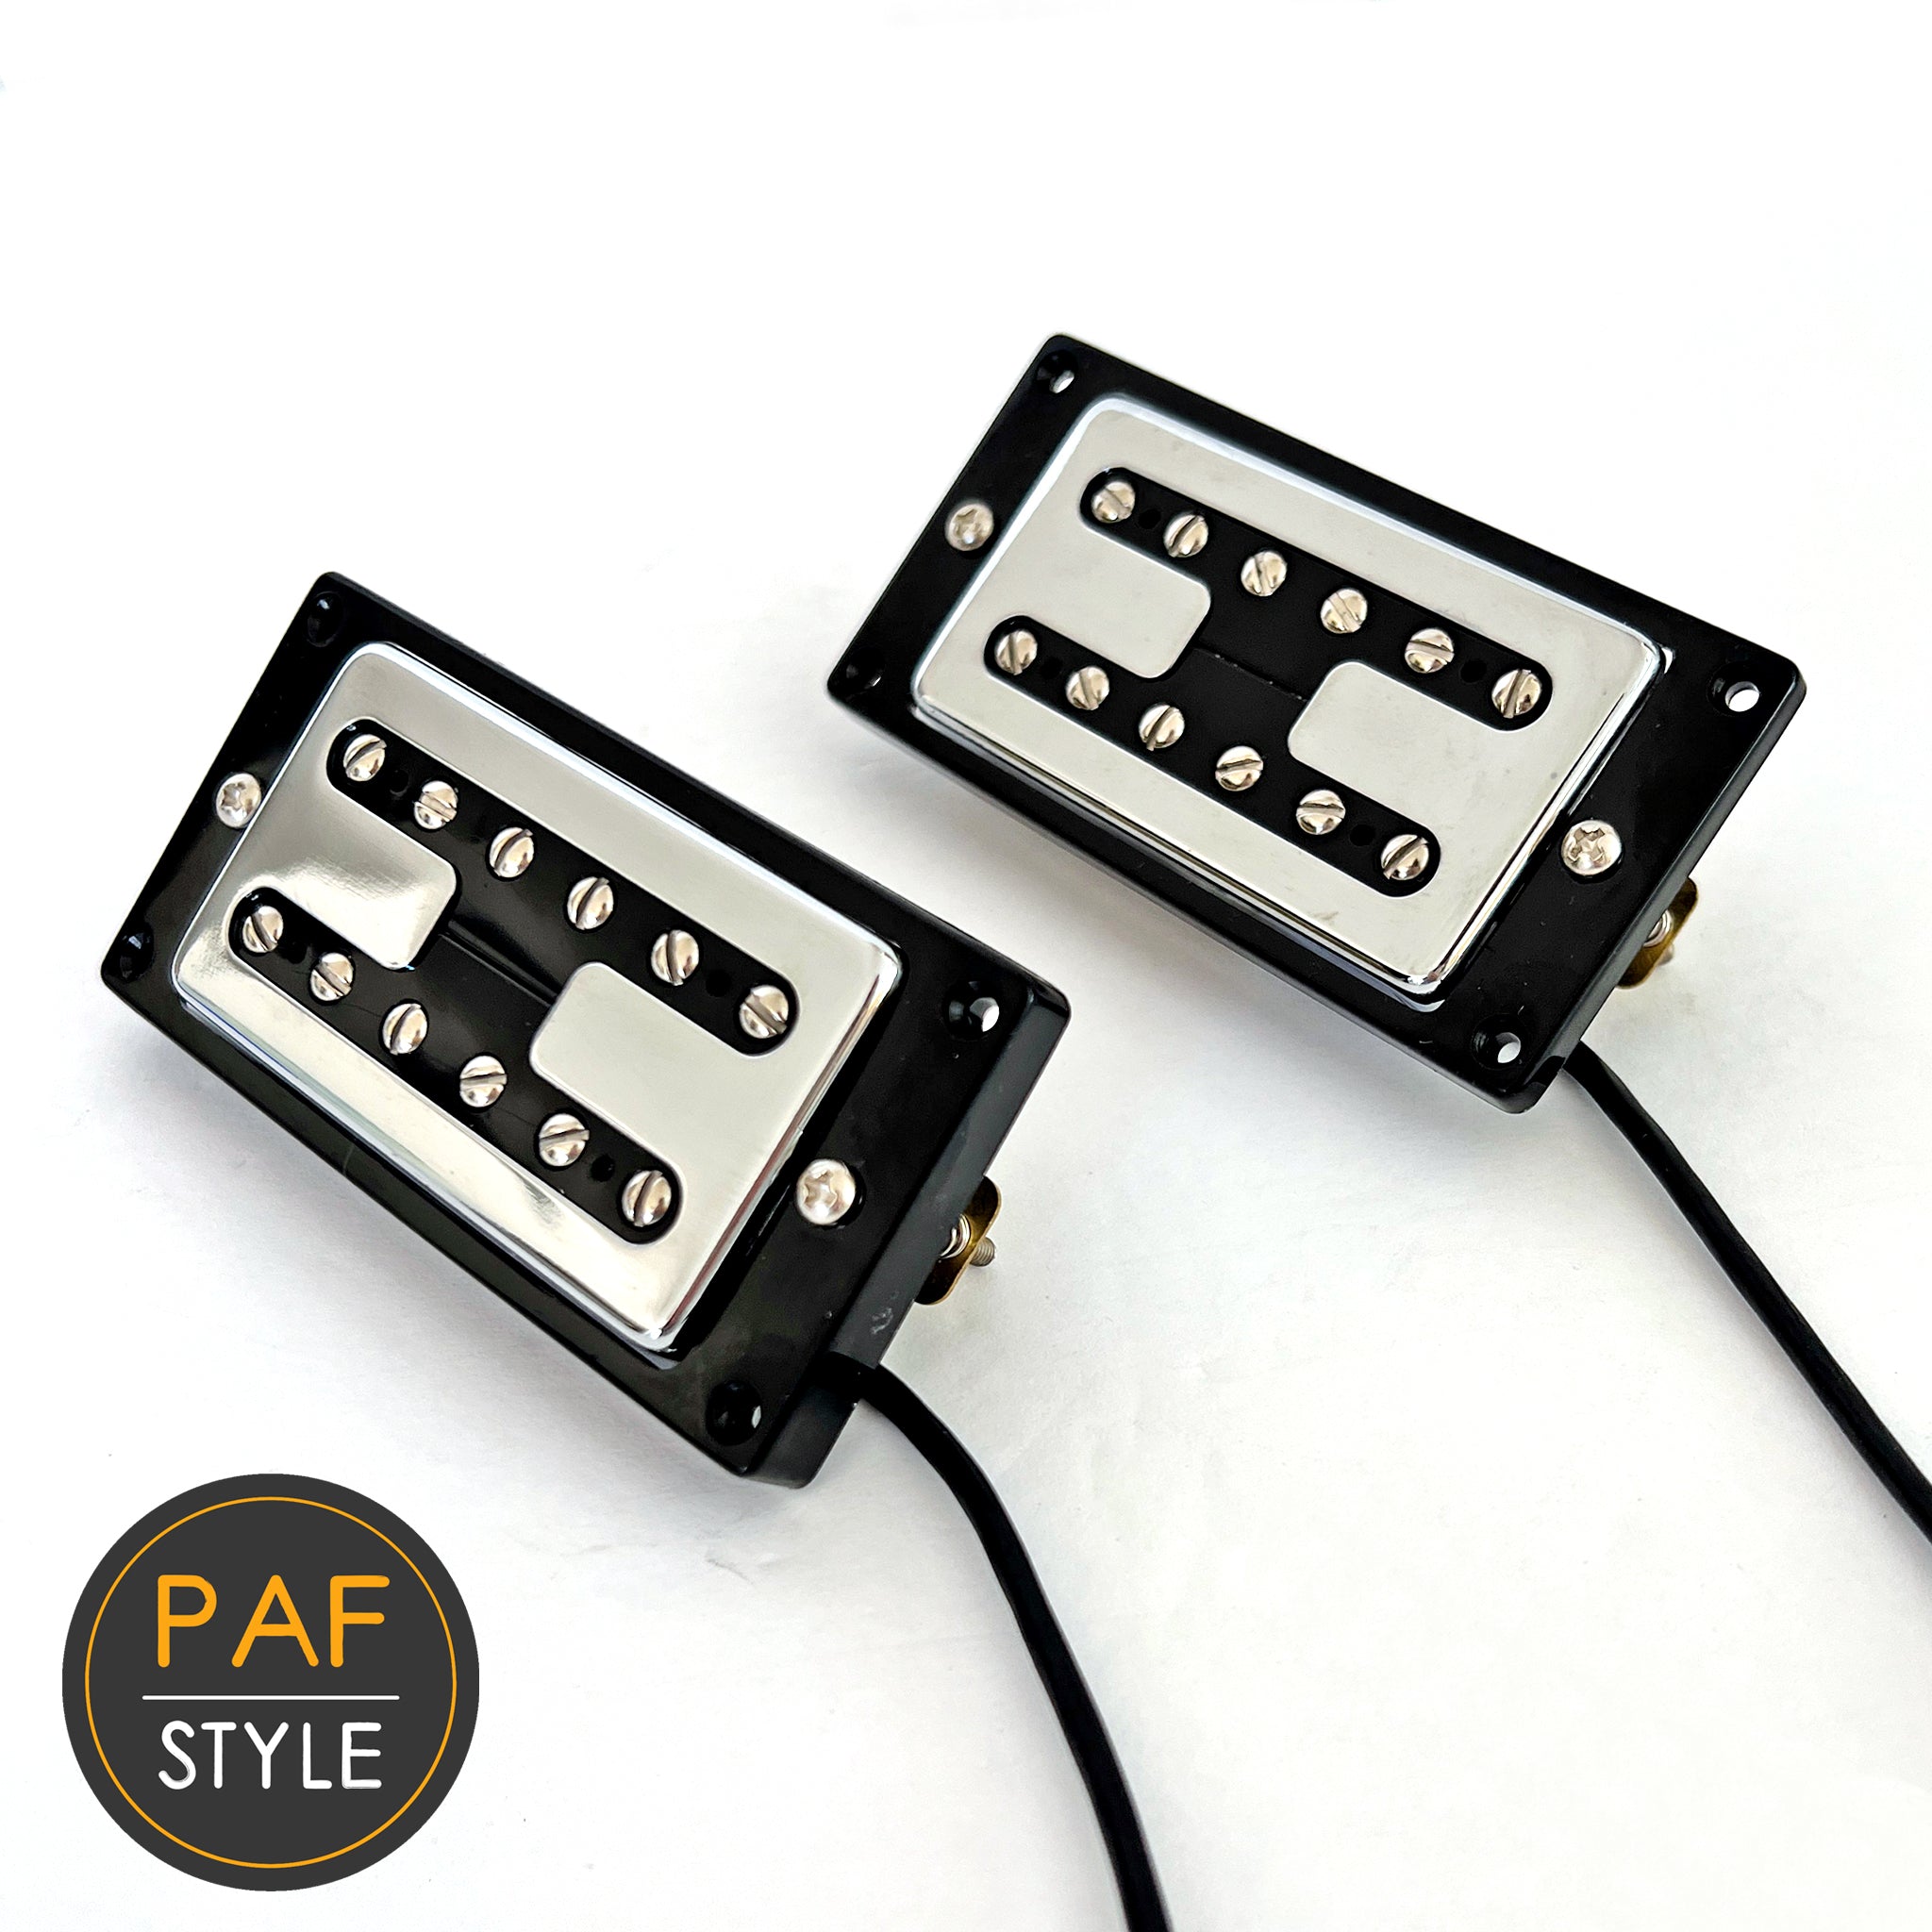 ⚡NEW PRODUCT⚡:  Filterbilly™ PAF Vintage Spec Filtertron Style Humbucker Pickup with Mounting Ring